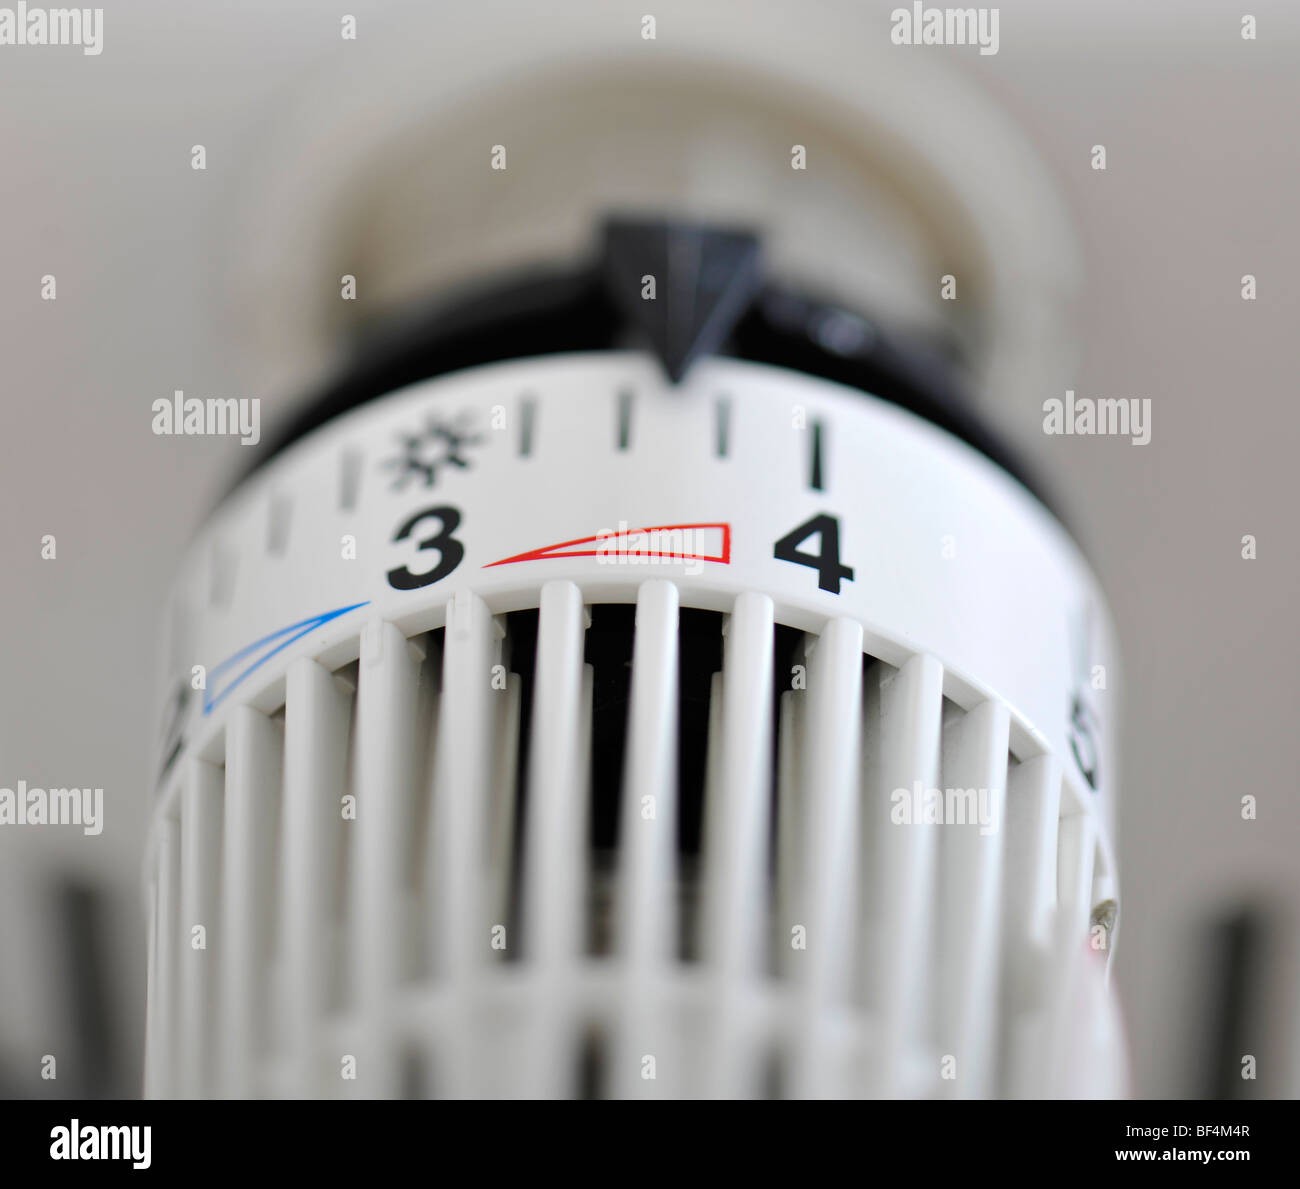 Thermostat, symbolic image for heating or energy costs Stock Photo